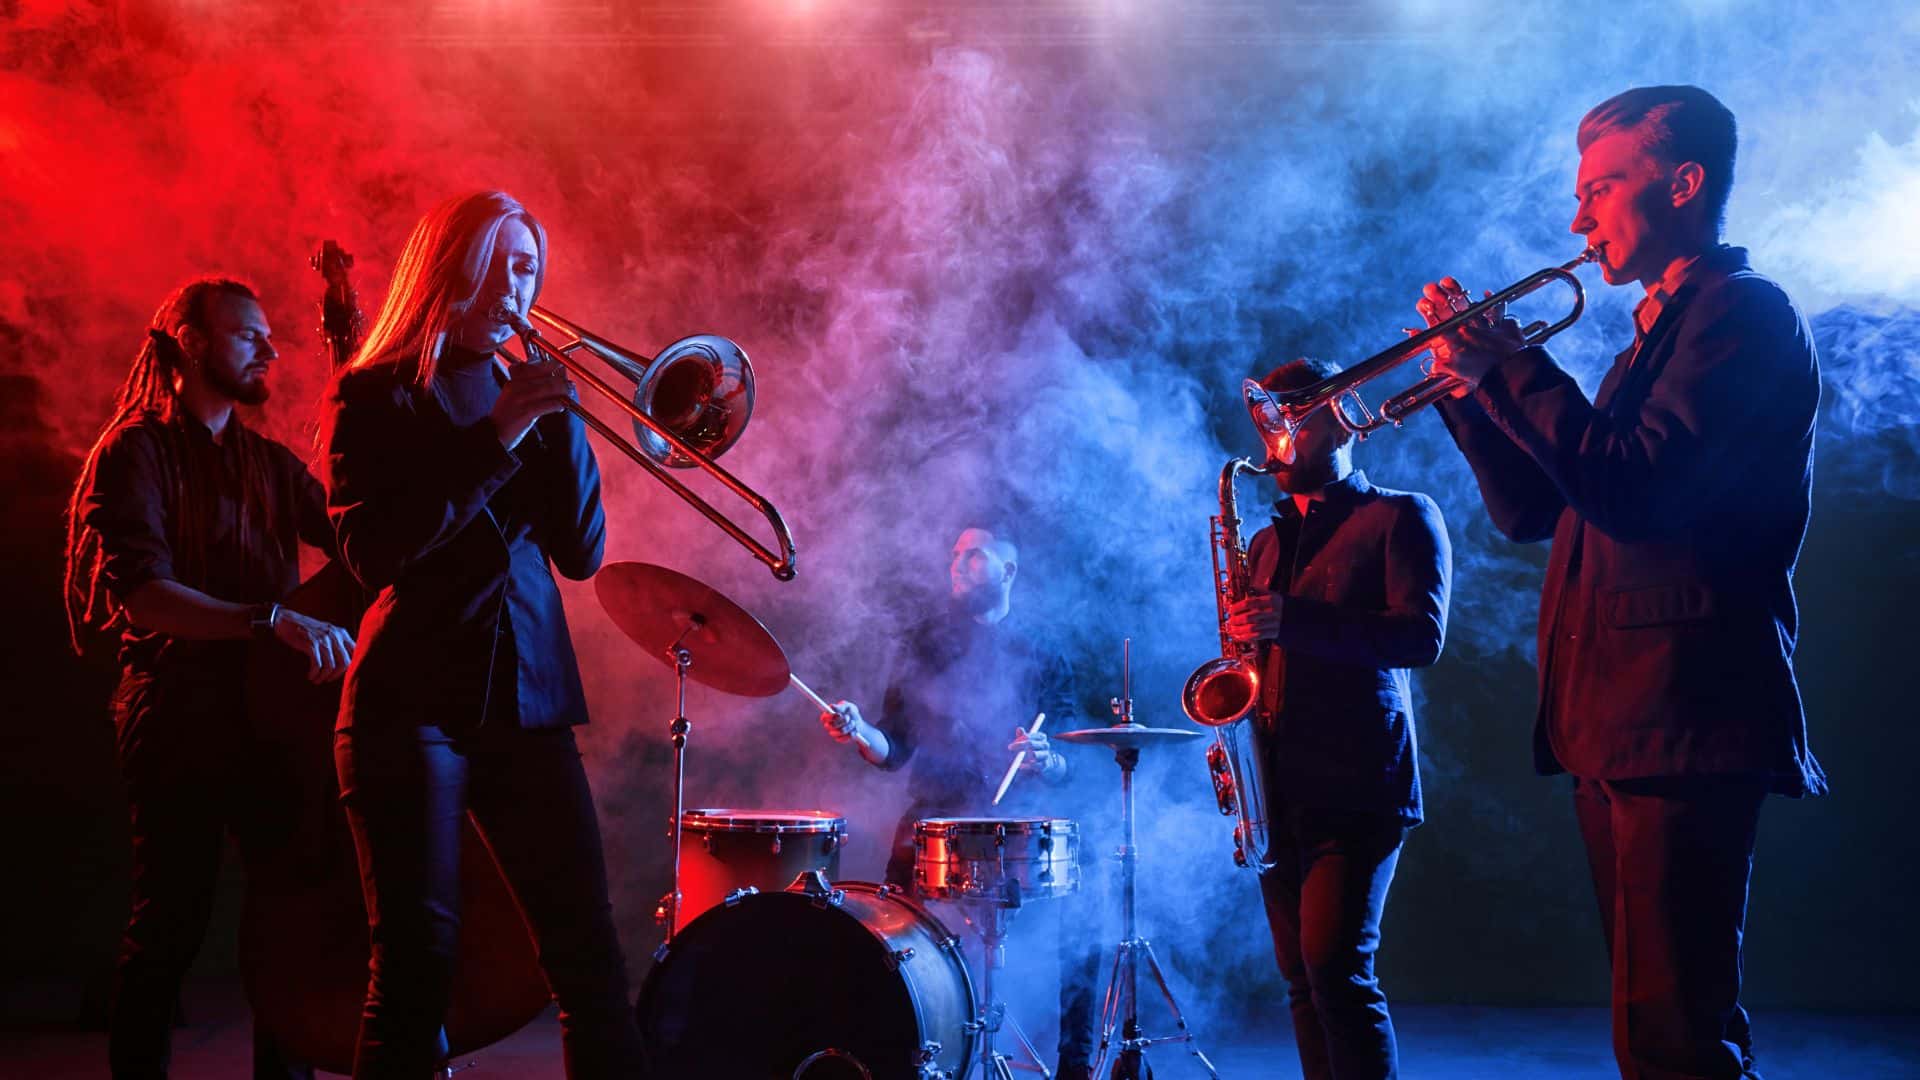 Jazz group performing on stage with smoke all around